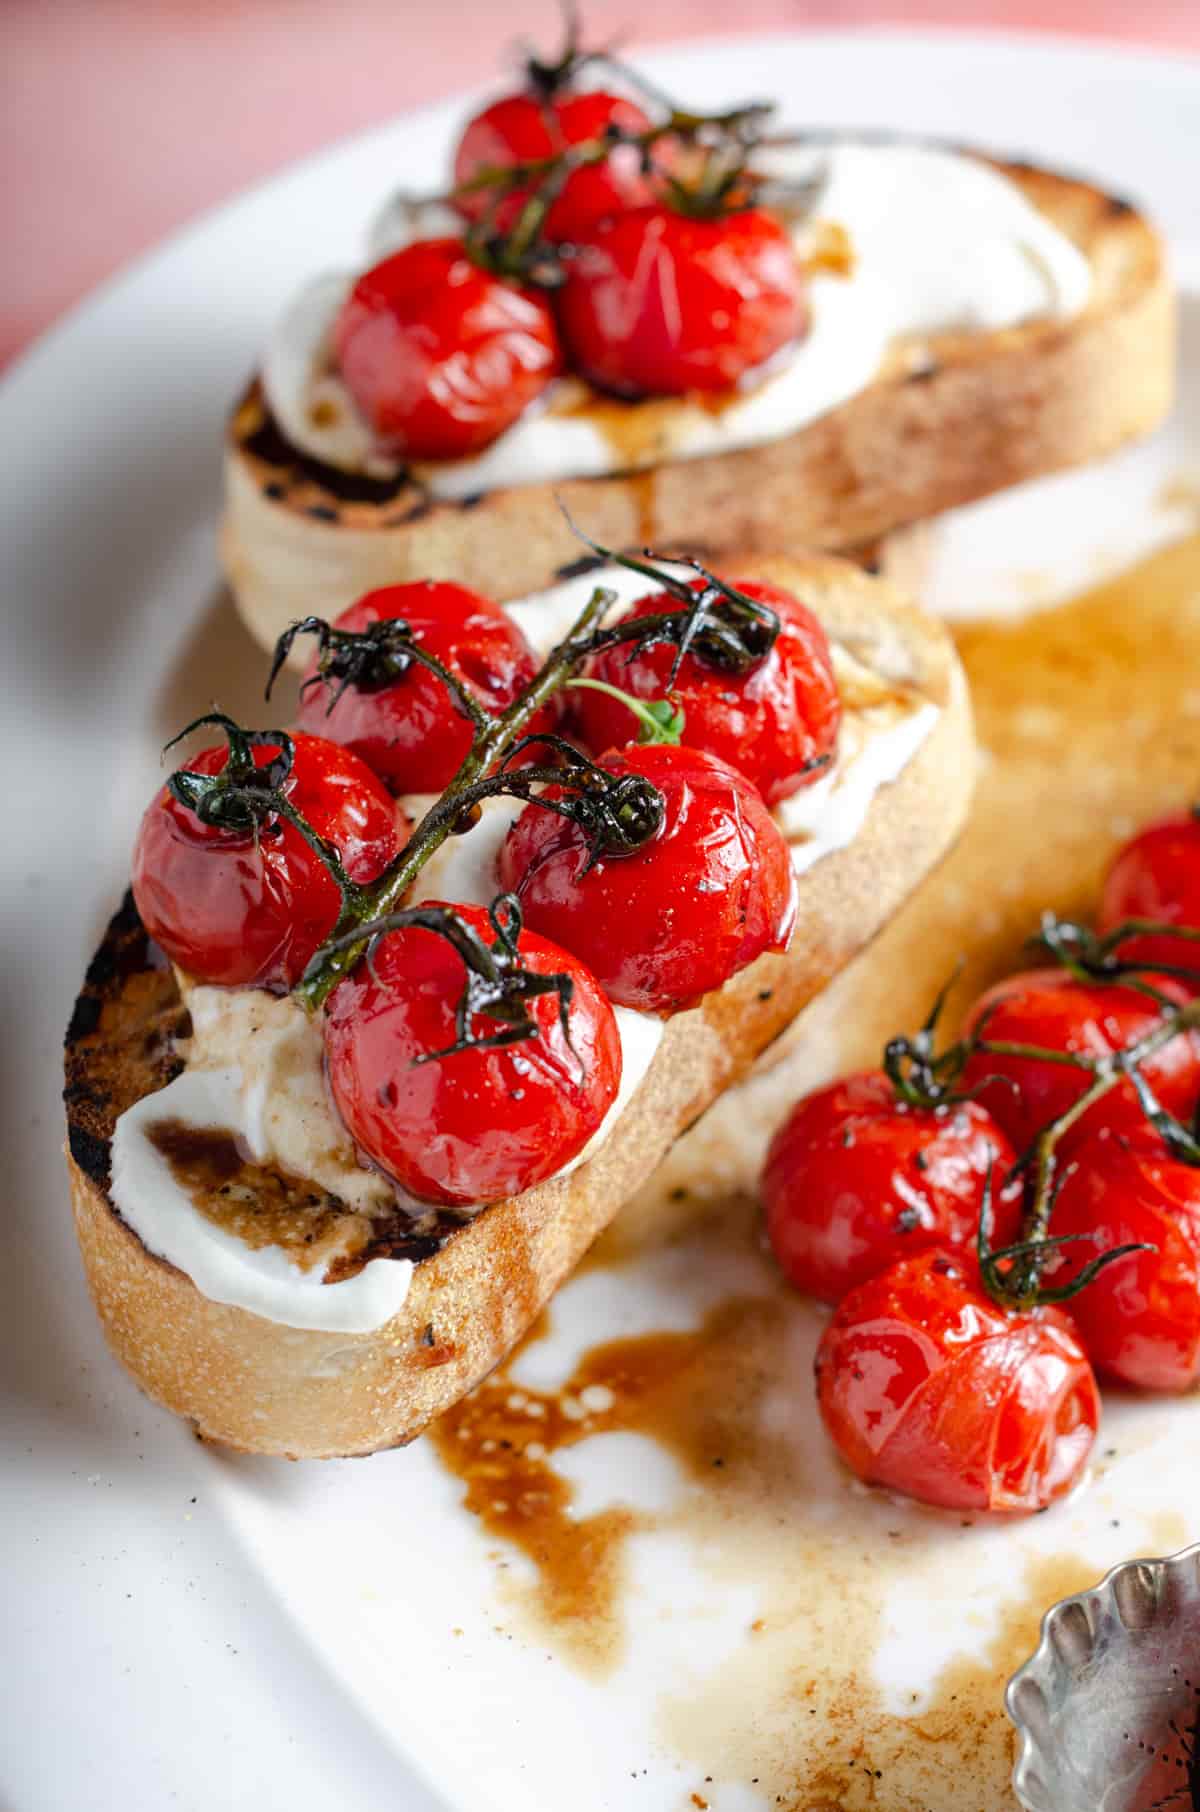 Juicy oven roasted red vine tomatoes glazed with a balsamic vinegar dressing served on whipped feta and toasted sourdough.